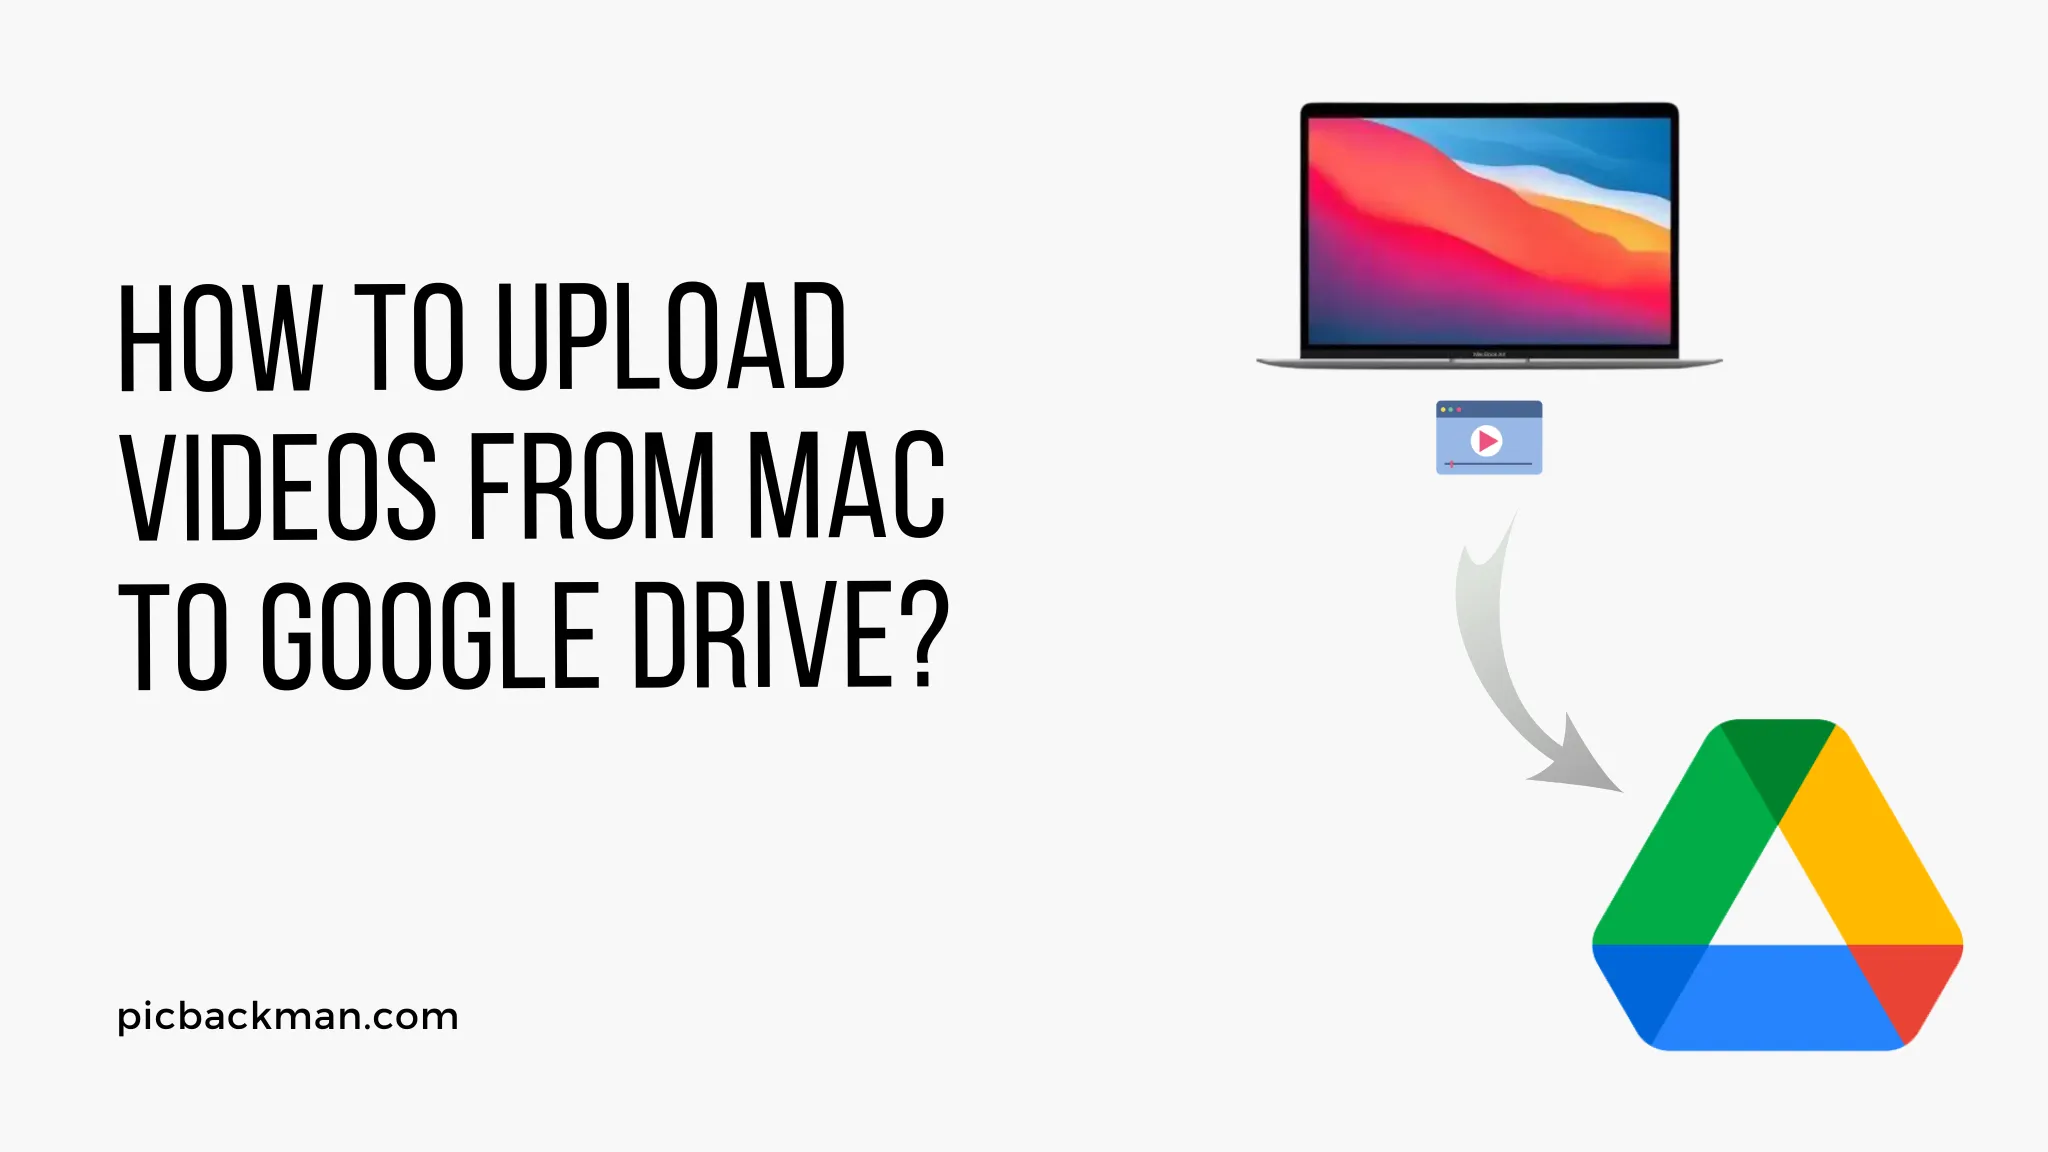 How to Upload Videos from Mac to Google Drive